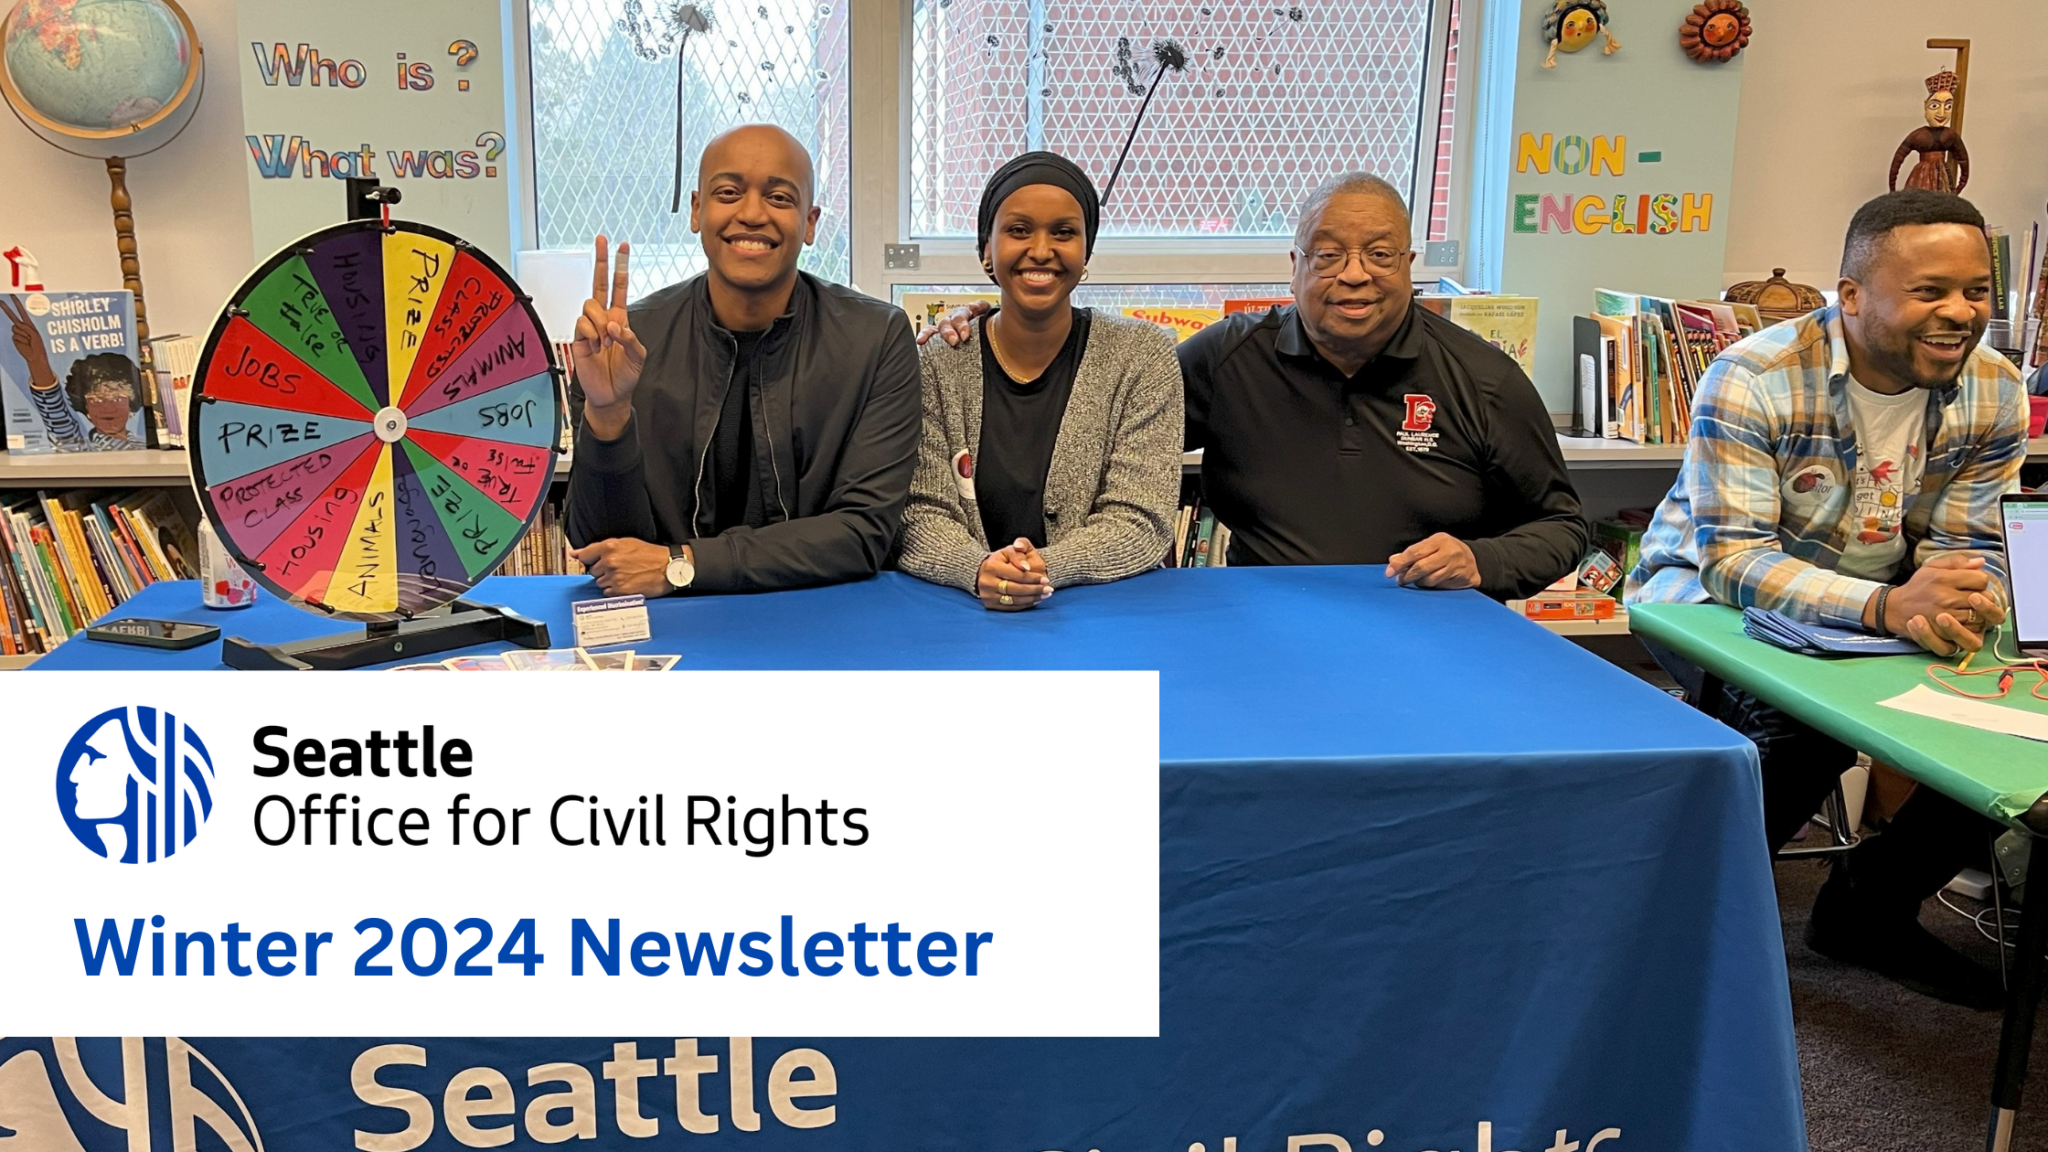 From L-to-R: Current King County Councilmember Girmay Zahilay; SOCR Deputy Director, Fahima Mohamed; Former King County Councilmember, Larry Gossett.